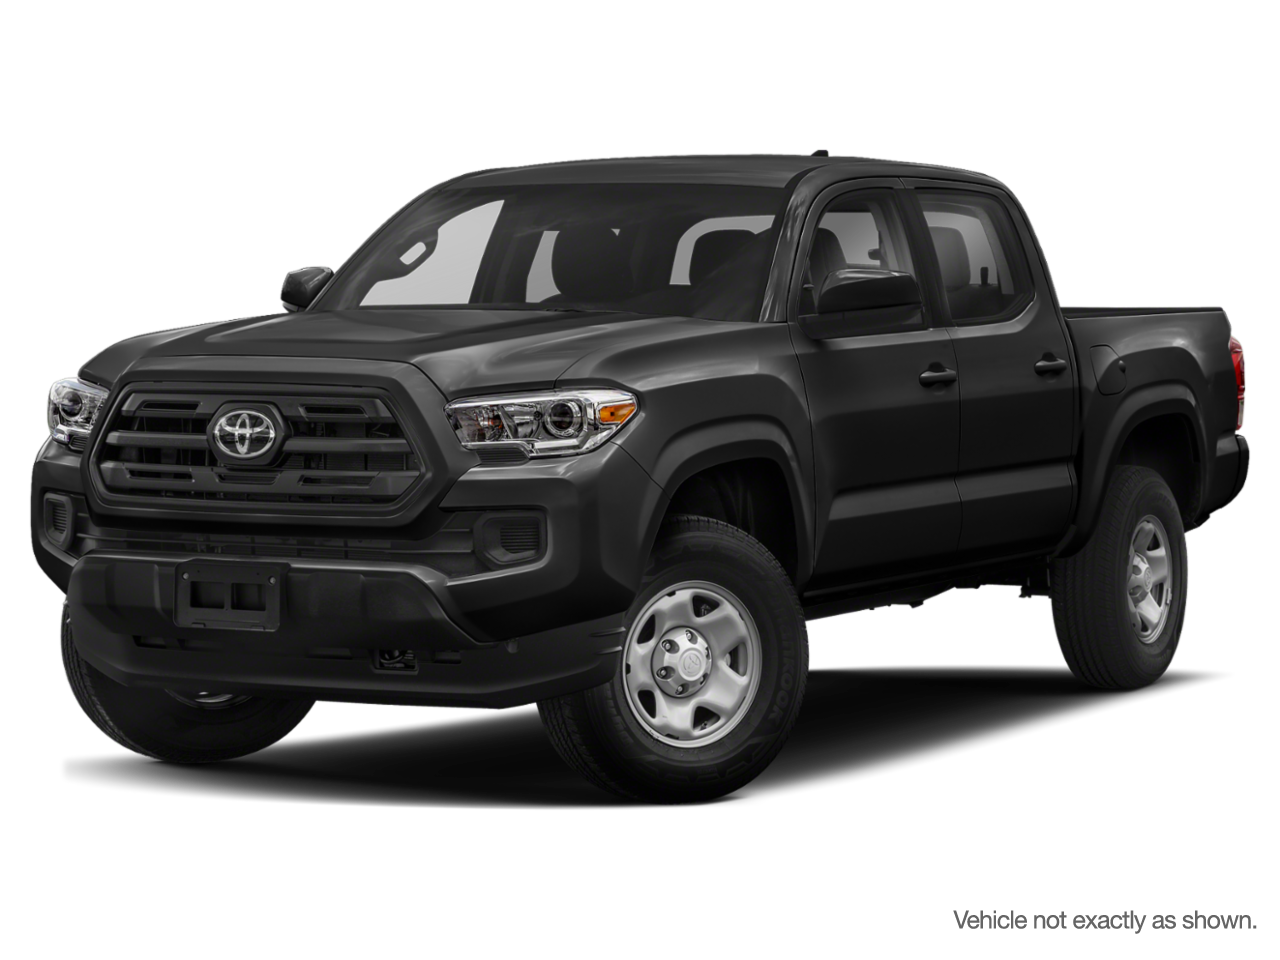 2019 Toyota Tacoma 4x4 Double Cab V6 SR5 6A |SR5 PACKAGE|